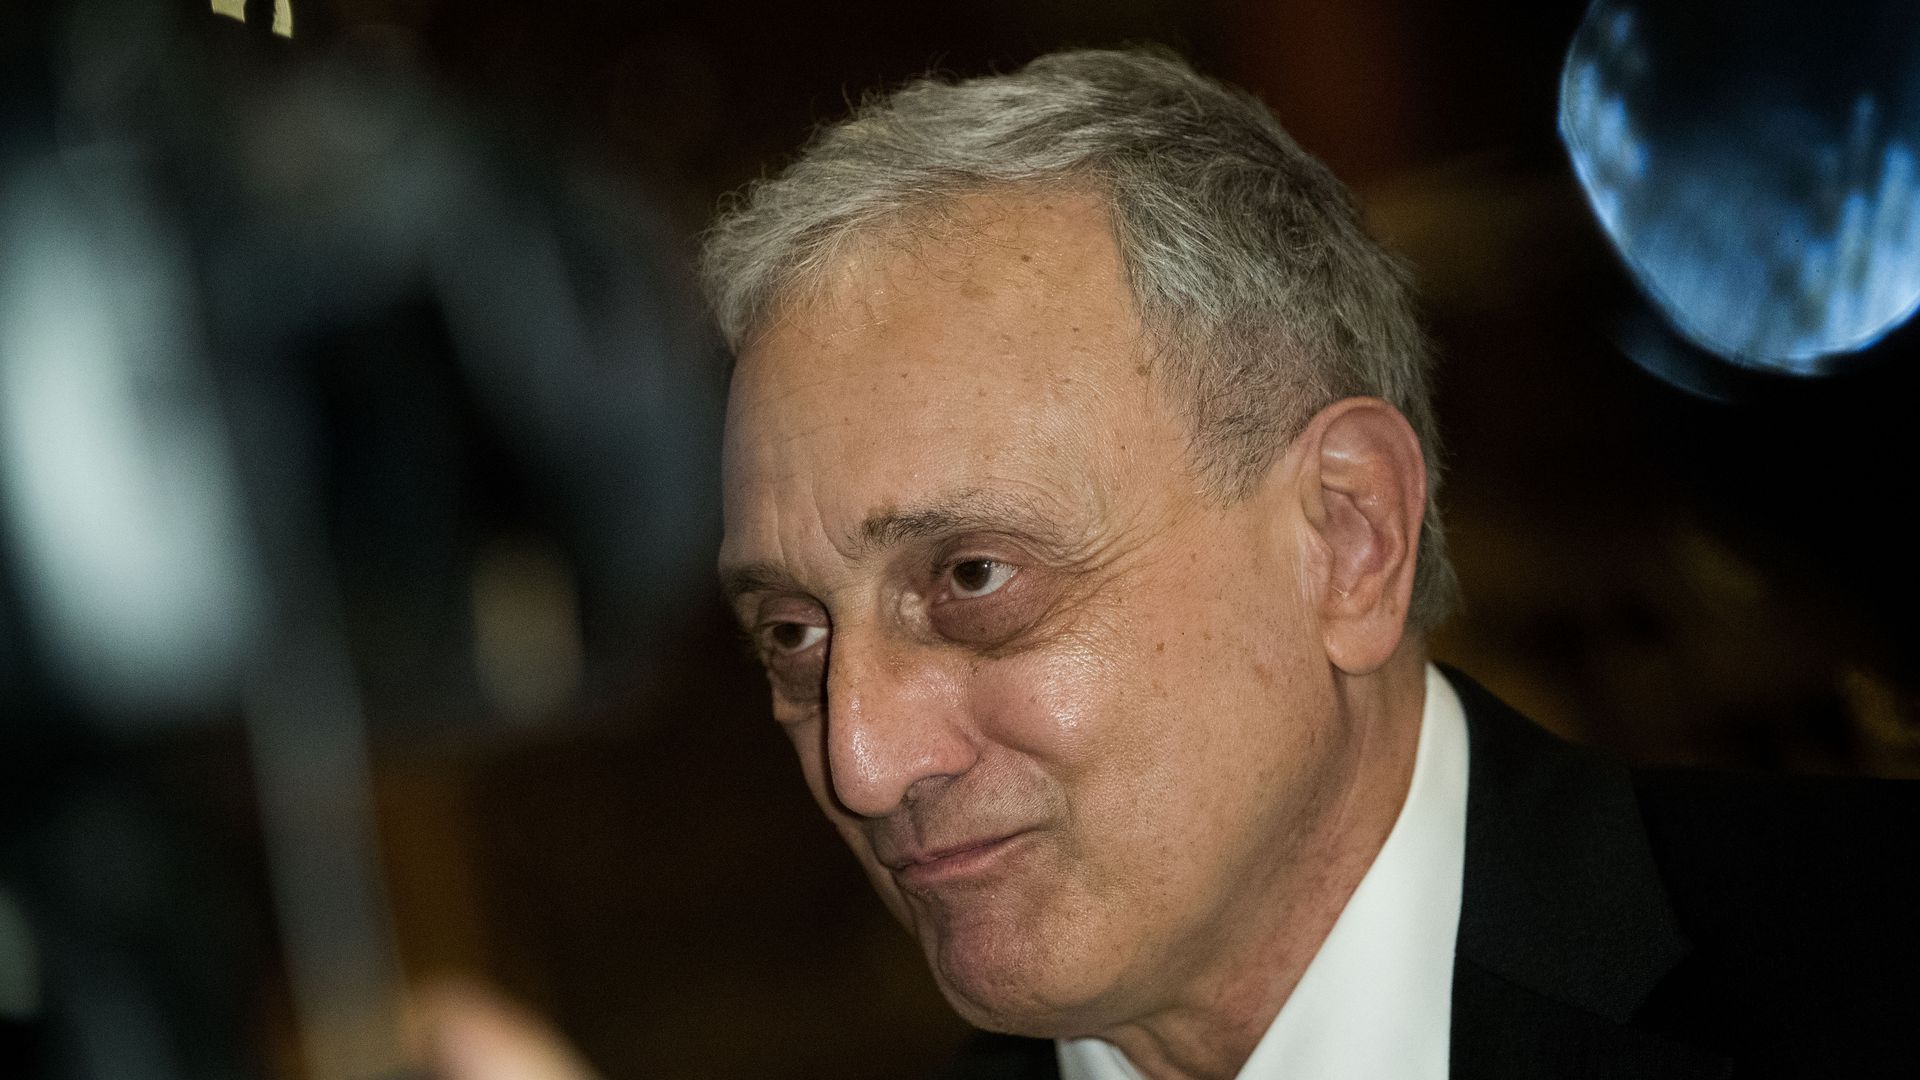 Carl Paladino in the lobby of Trump Tower in 2016 in New York City.